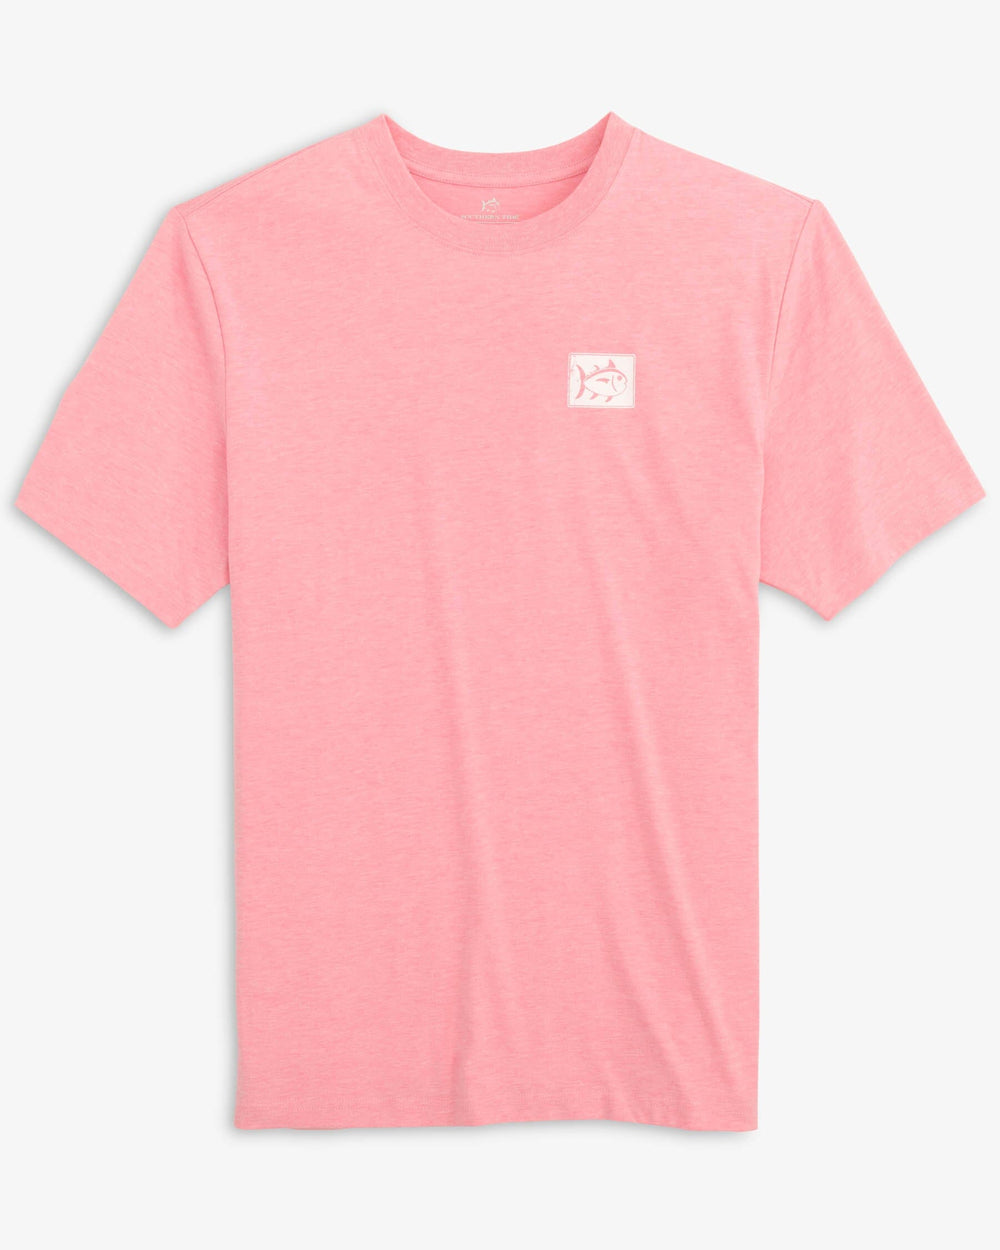 The front view of the Southern Tide Heather Party Beach Sign T-Shirt by Southern Tide - Heather Flamingo Pink